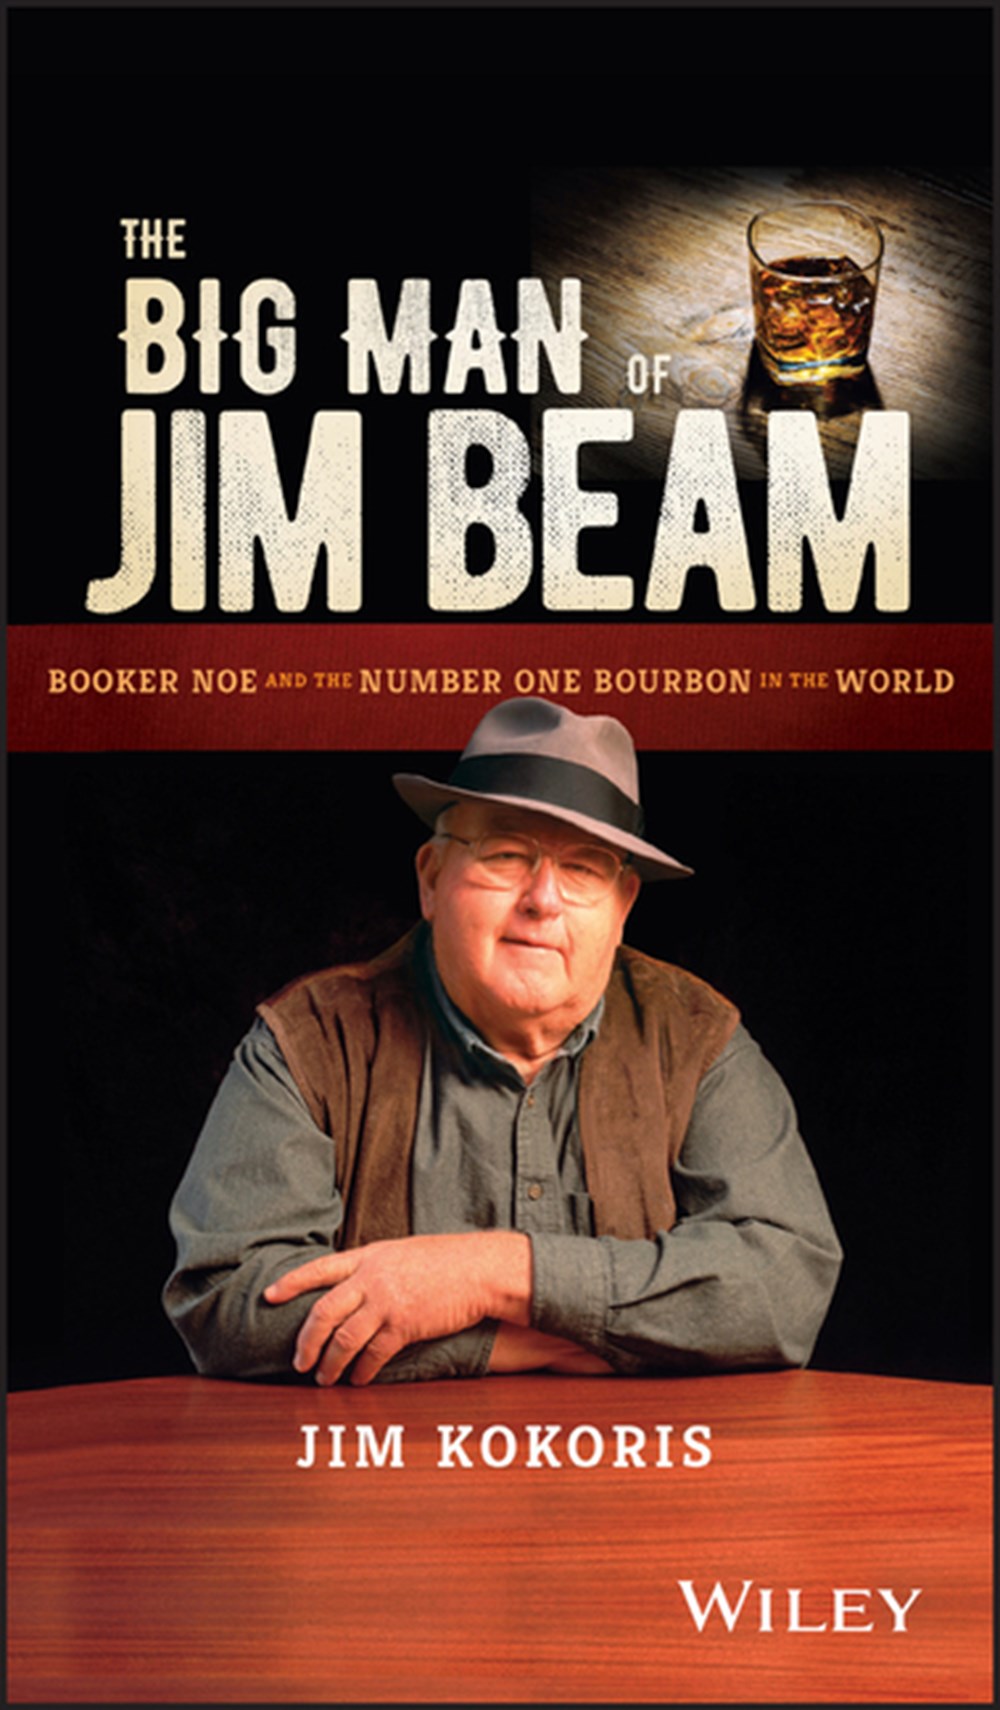 Big Man of Jim Beam Booker Noe and the Number-One Bourbon in the World